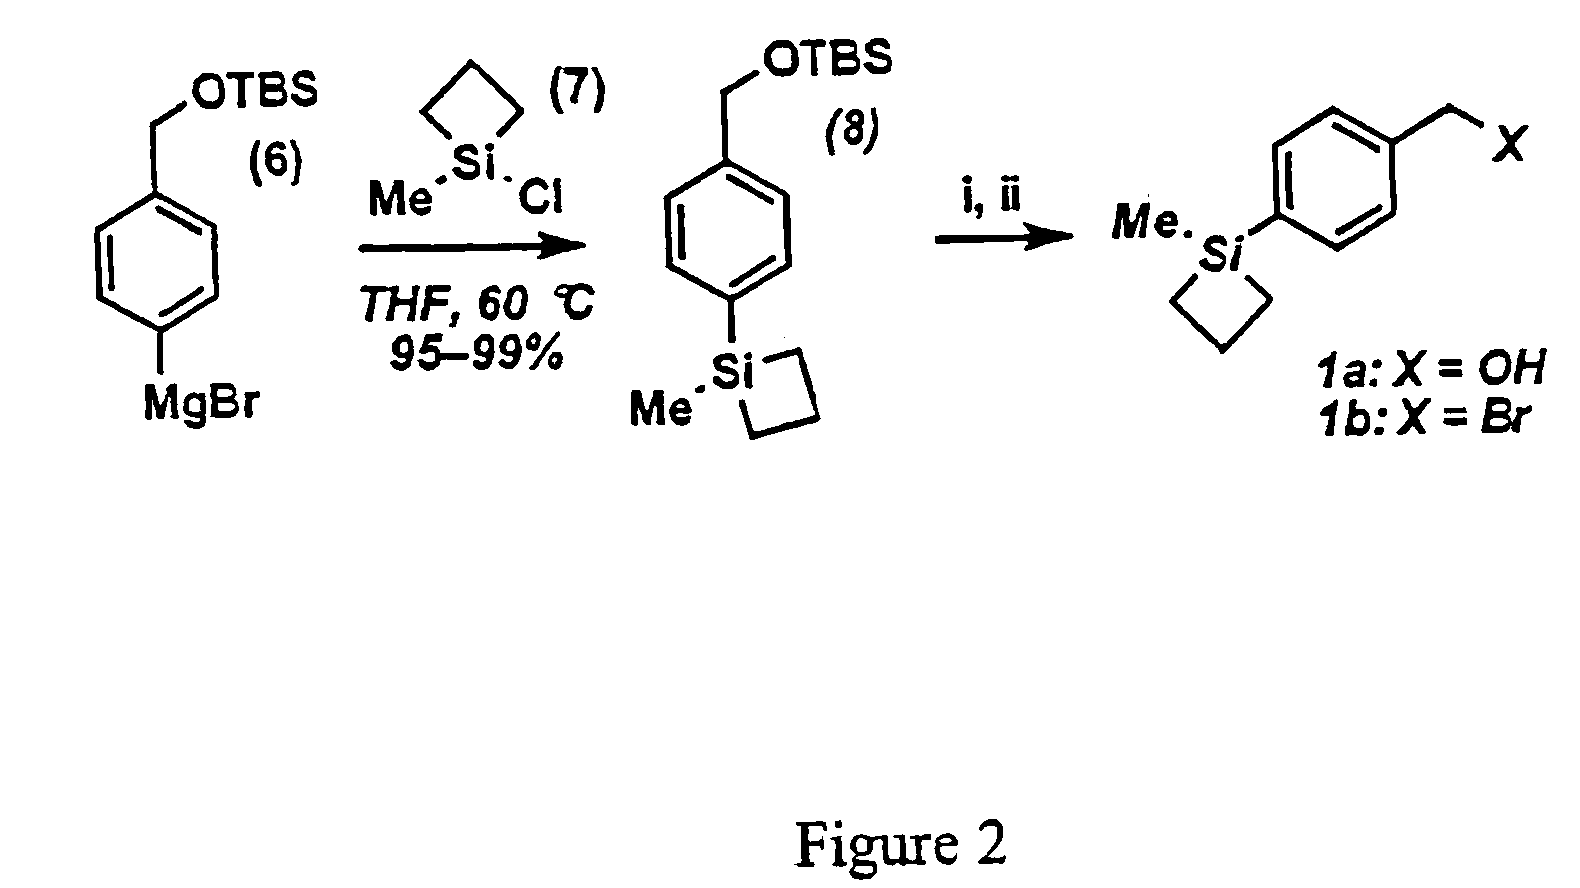 Compounds and methods of arylmethylation (benzylation) as protection for alcohol groups during chemical synthesis